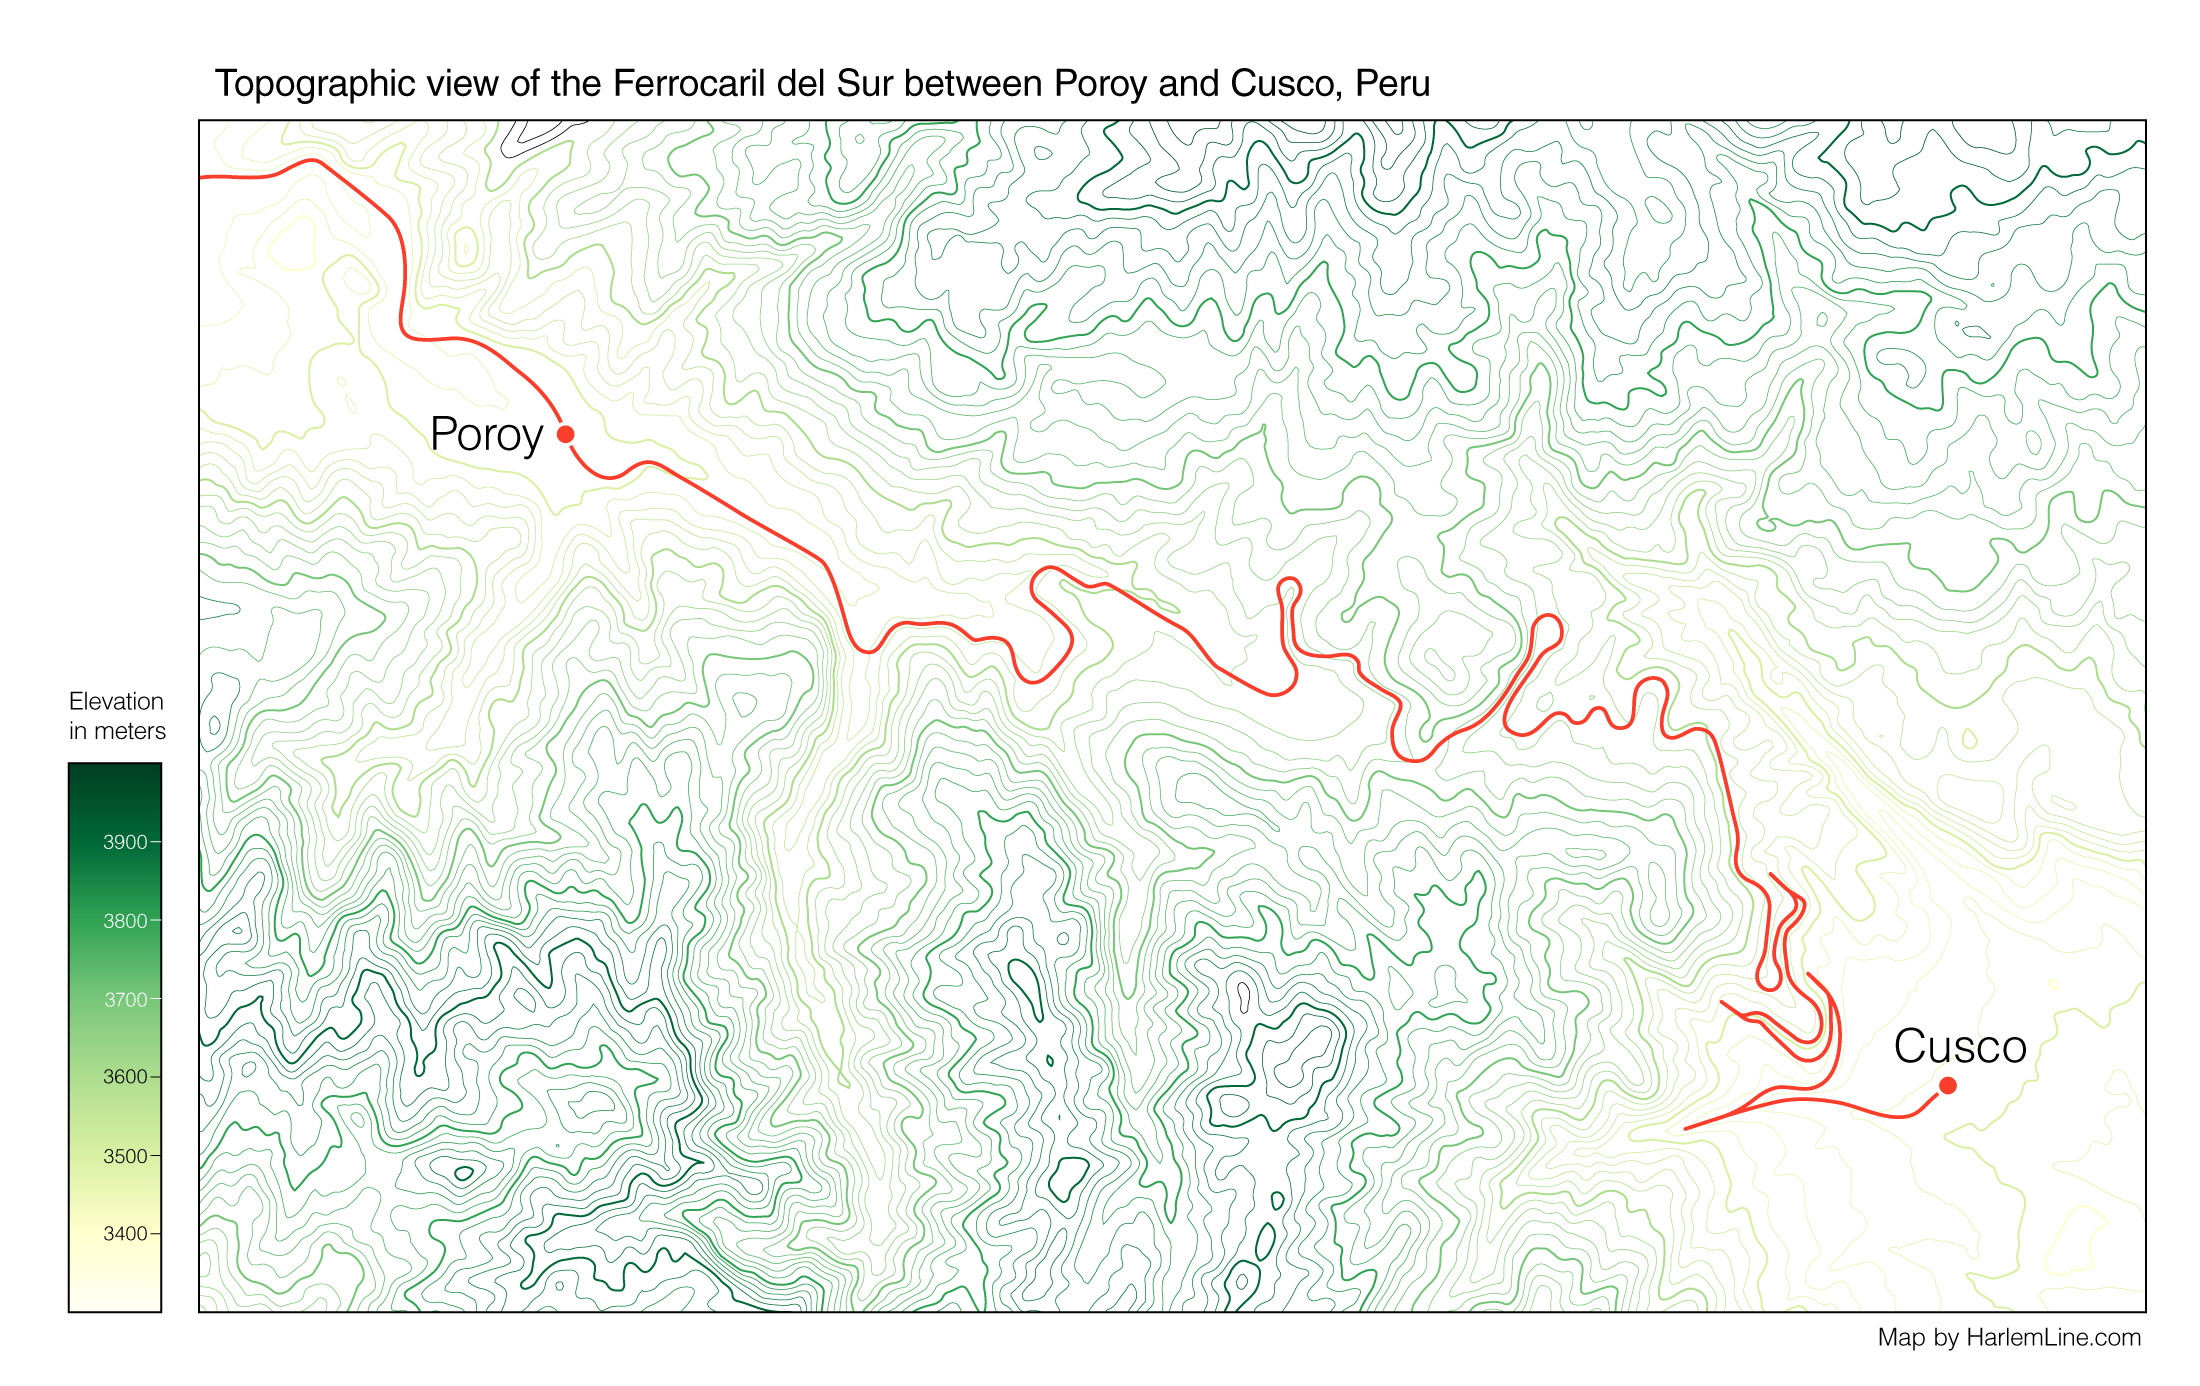 Topographic view of the Ferrocaril del Sur between Poroy and Cusco, Peru